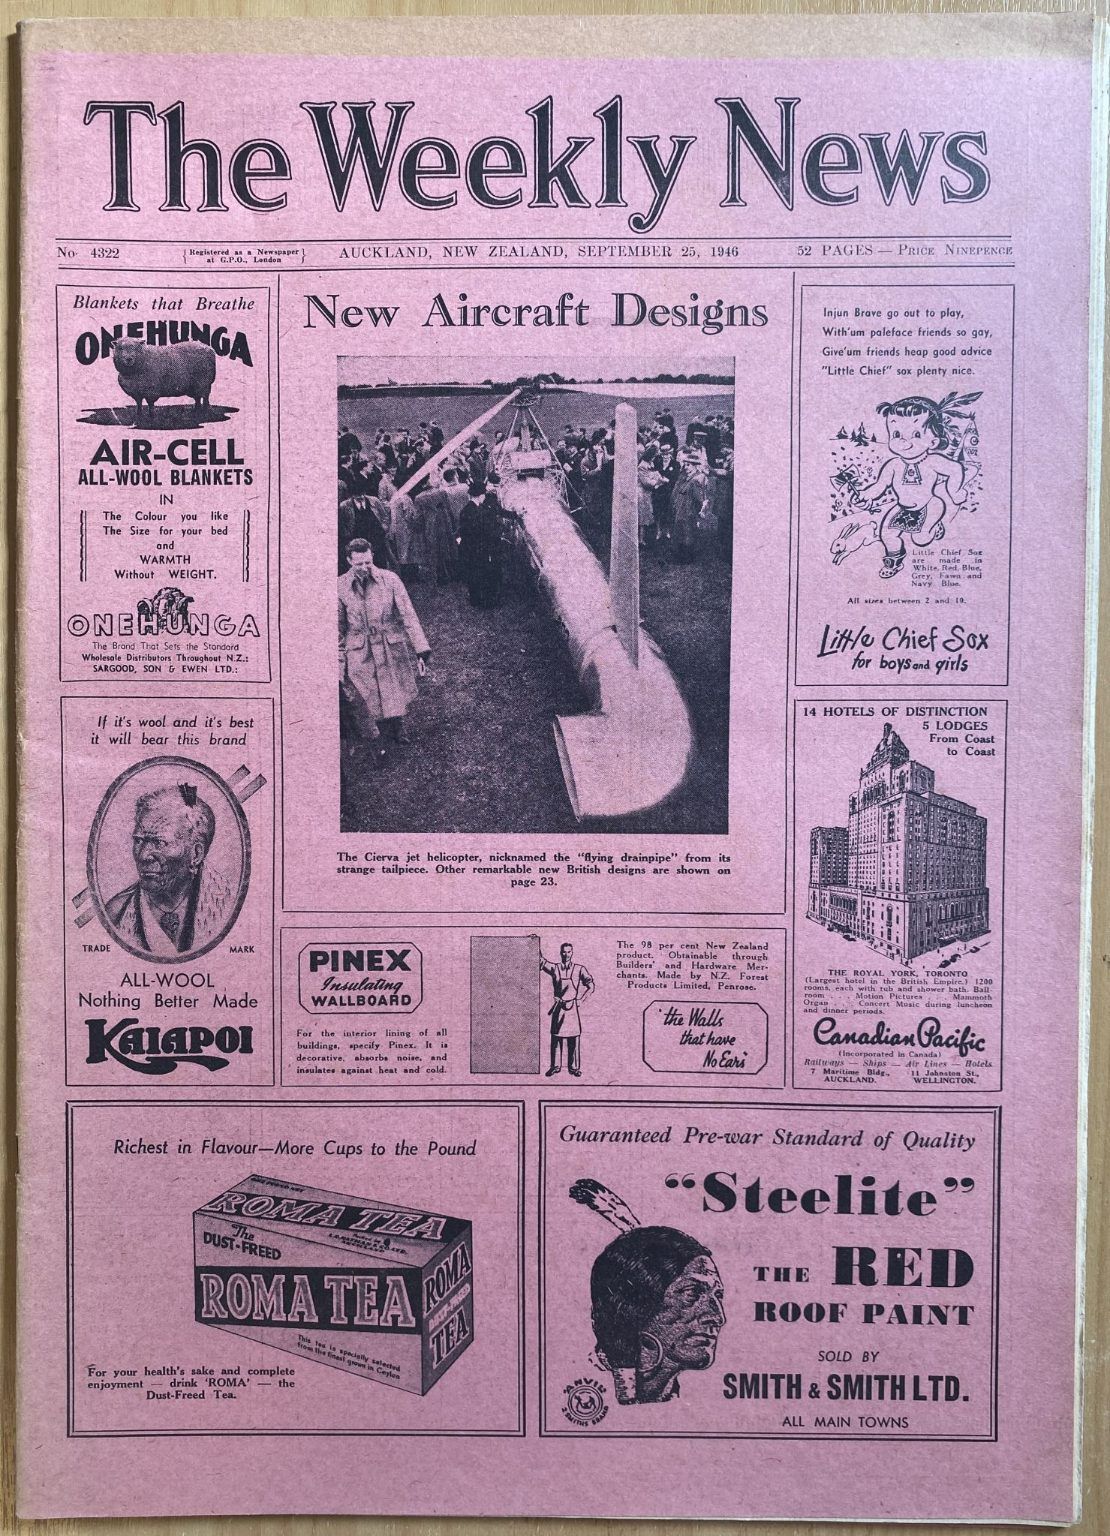 OLD NEWSPAPER: The Weekly News - No. 4322, 25 September 1946